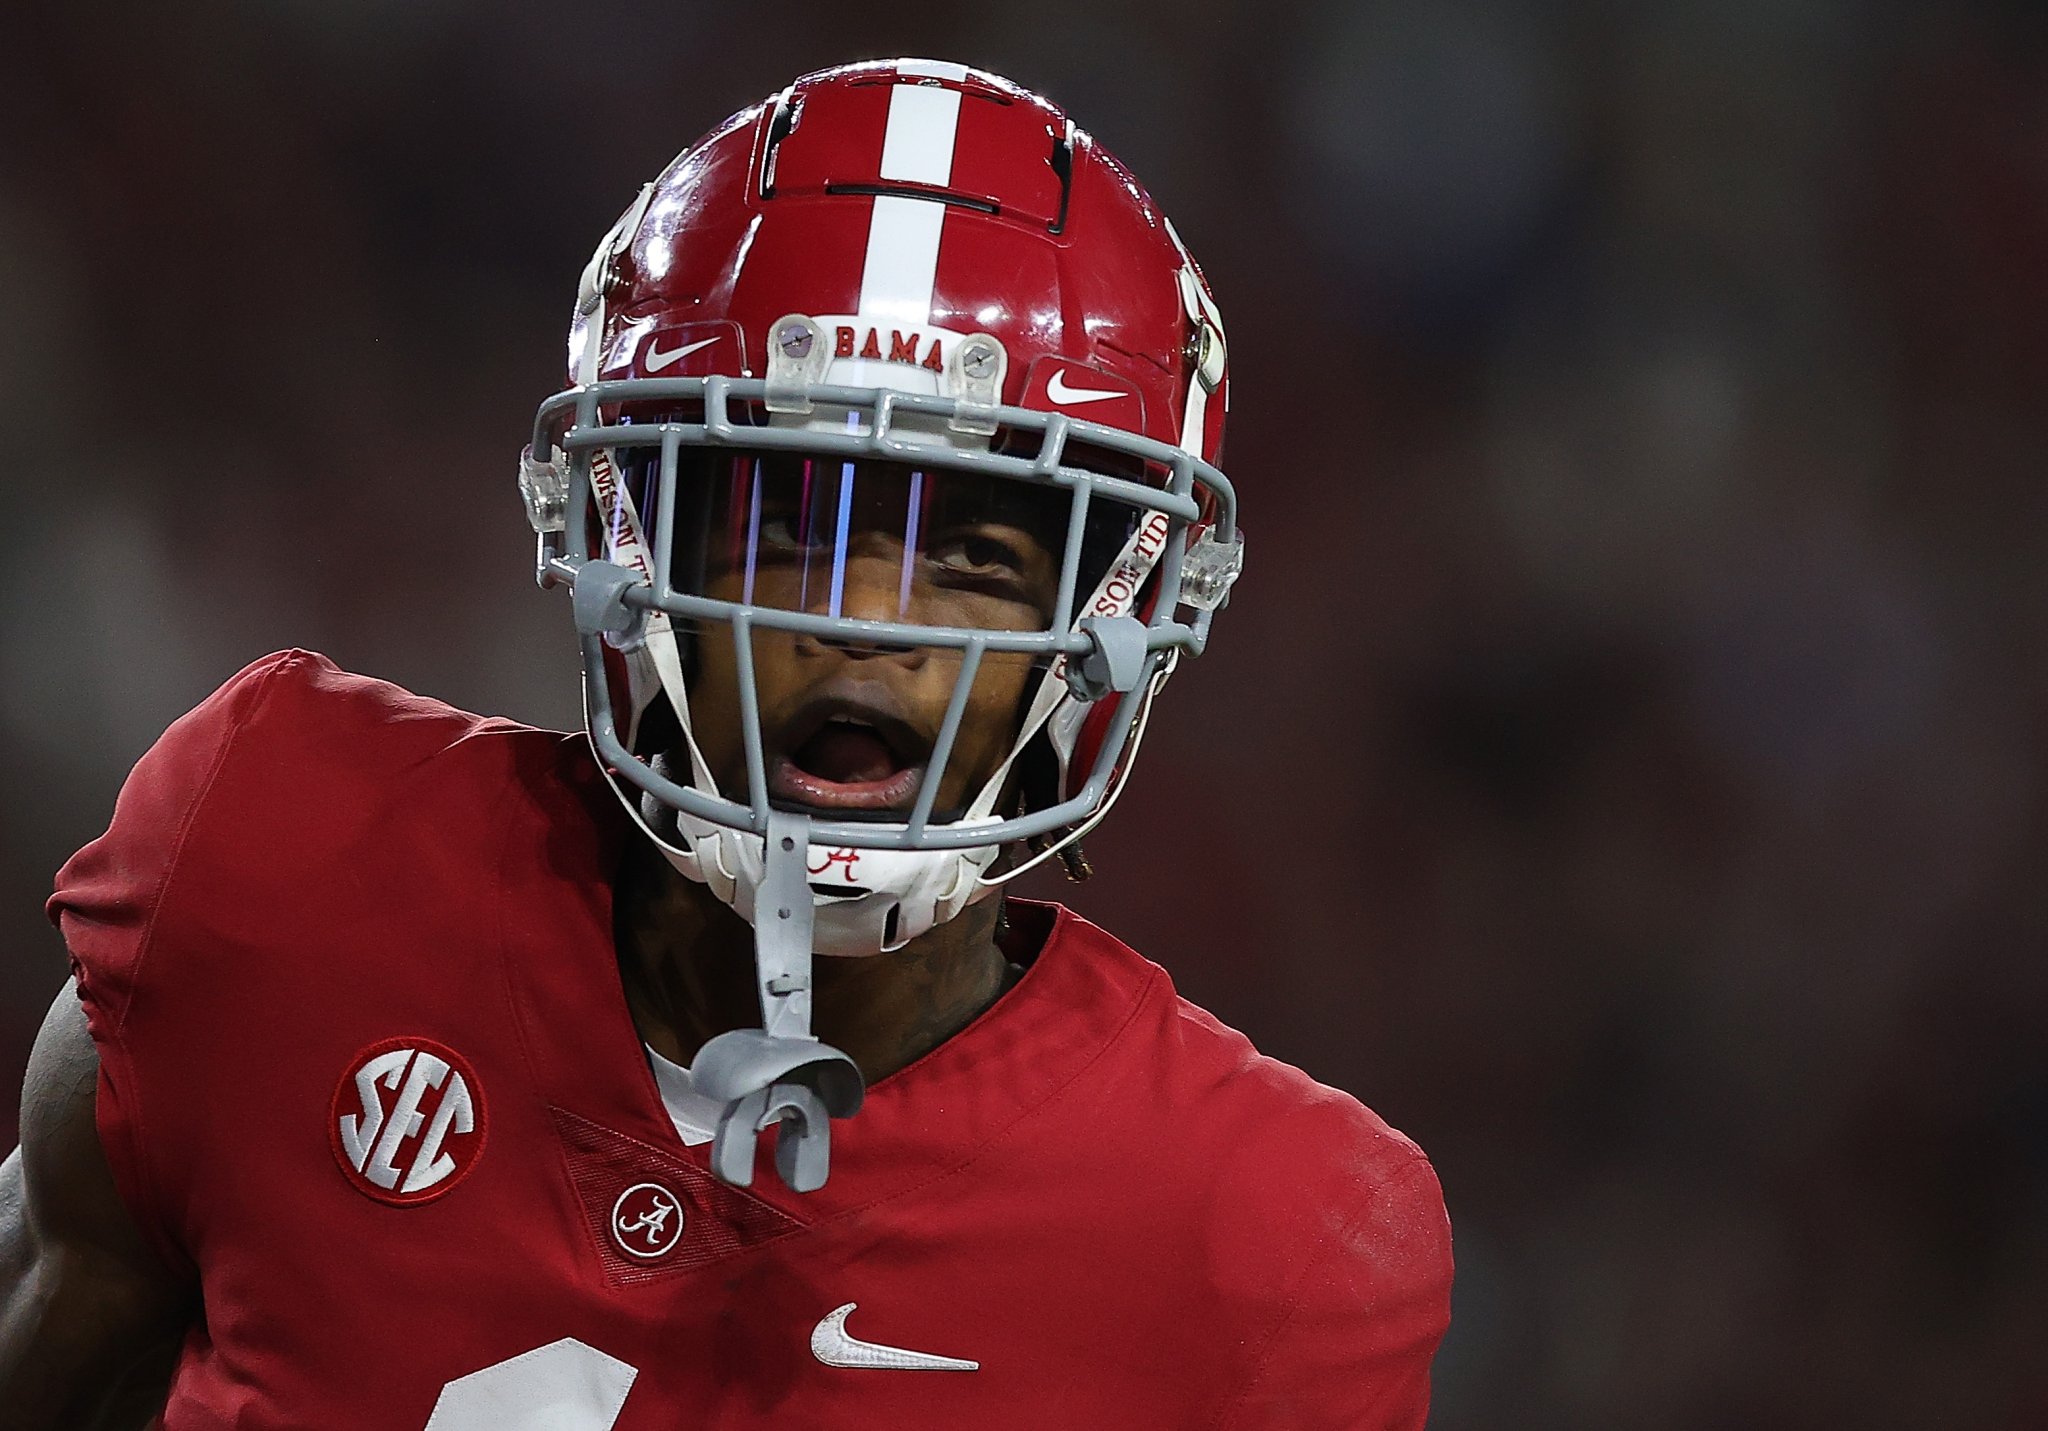 Alabama's Top Receiver, Jameson Williams, Ejected For Targeting Against Auburn